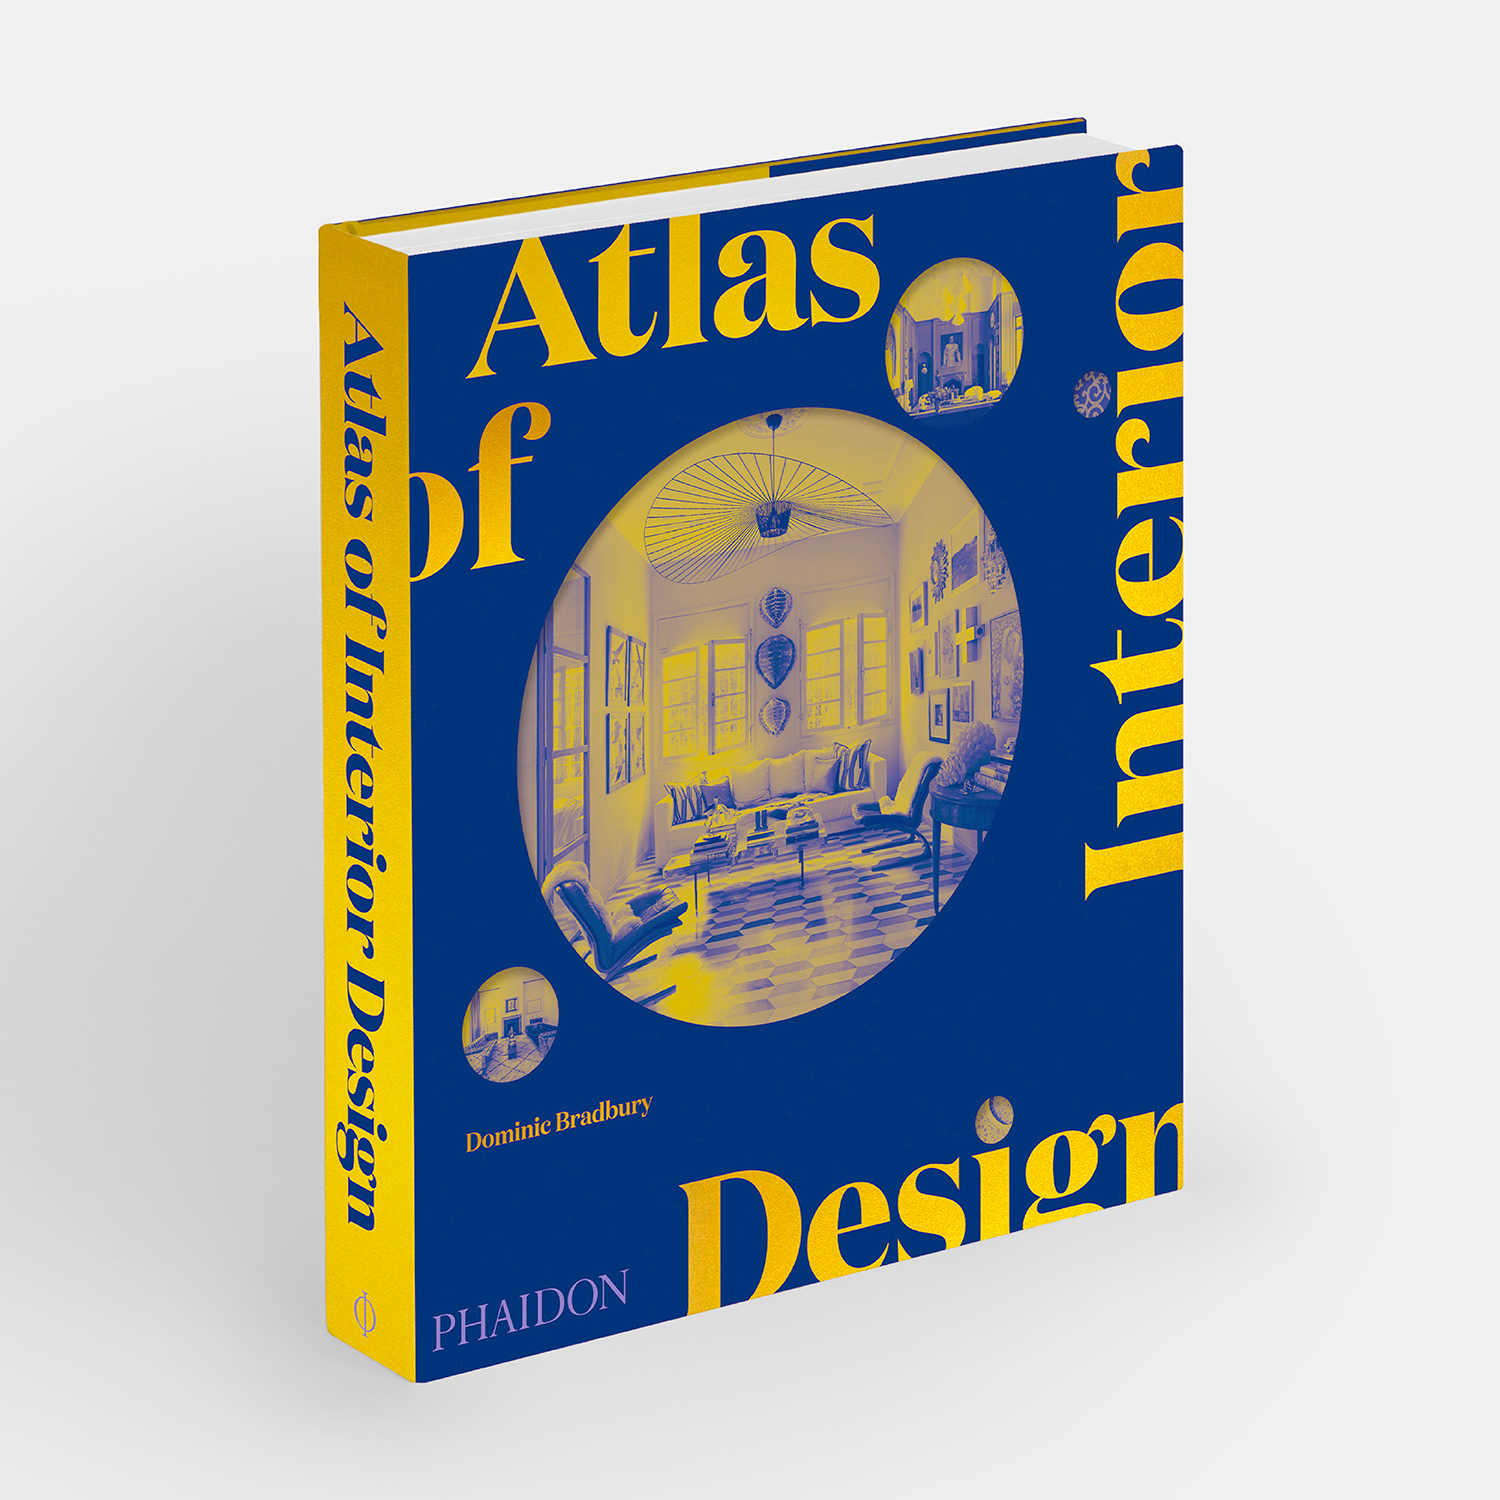 All you need to know about The Atlas of Interior Design